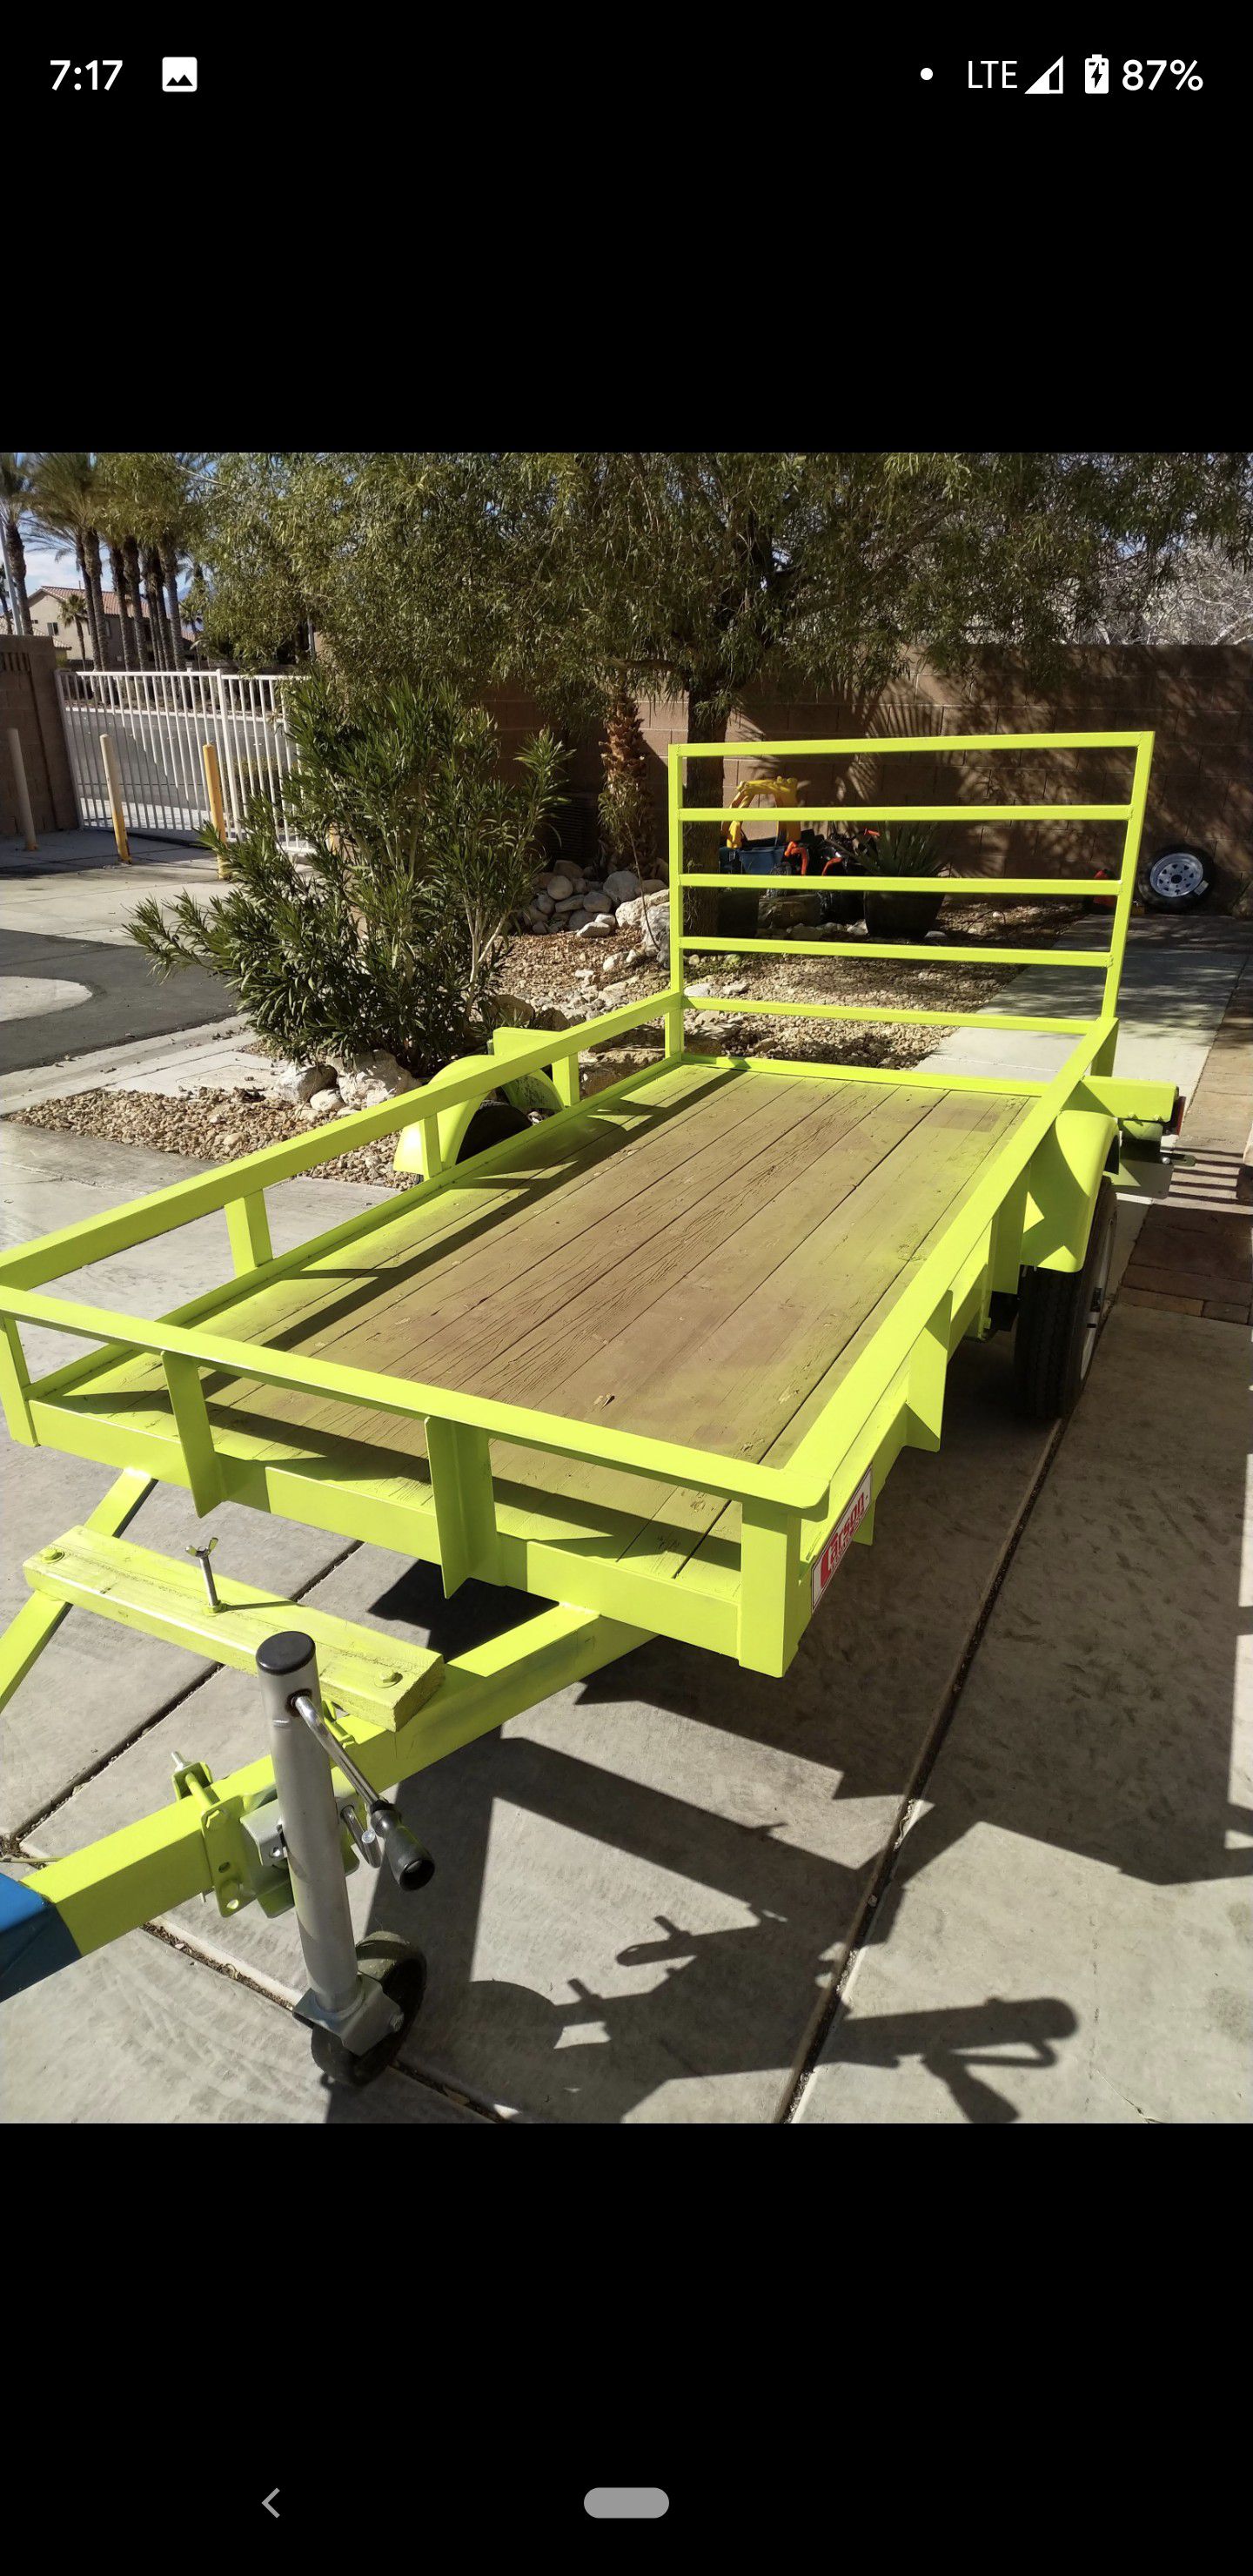 Atv utility trailer up for sale